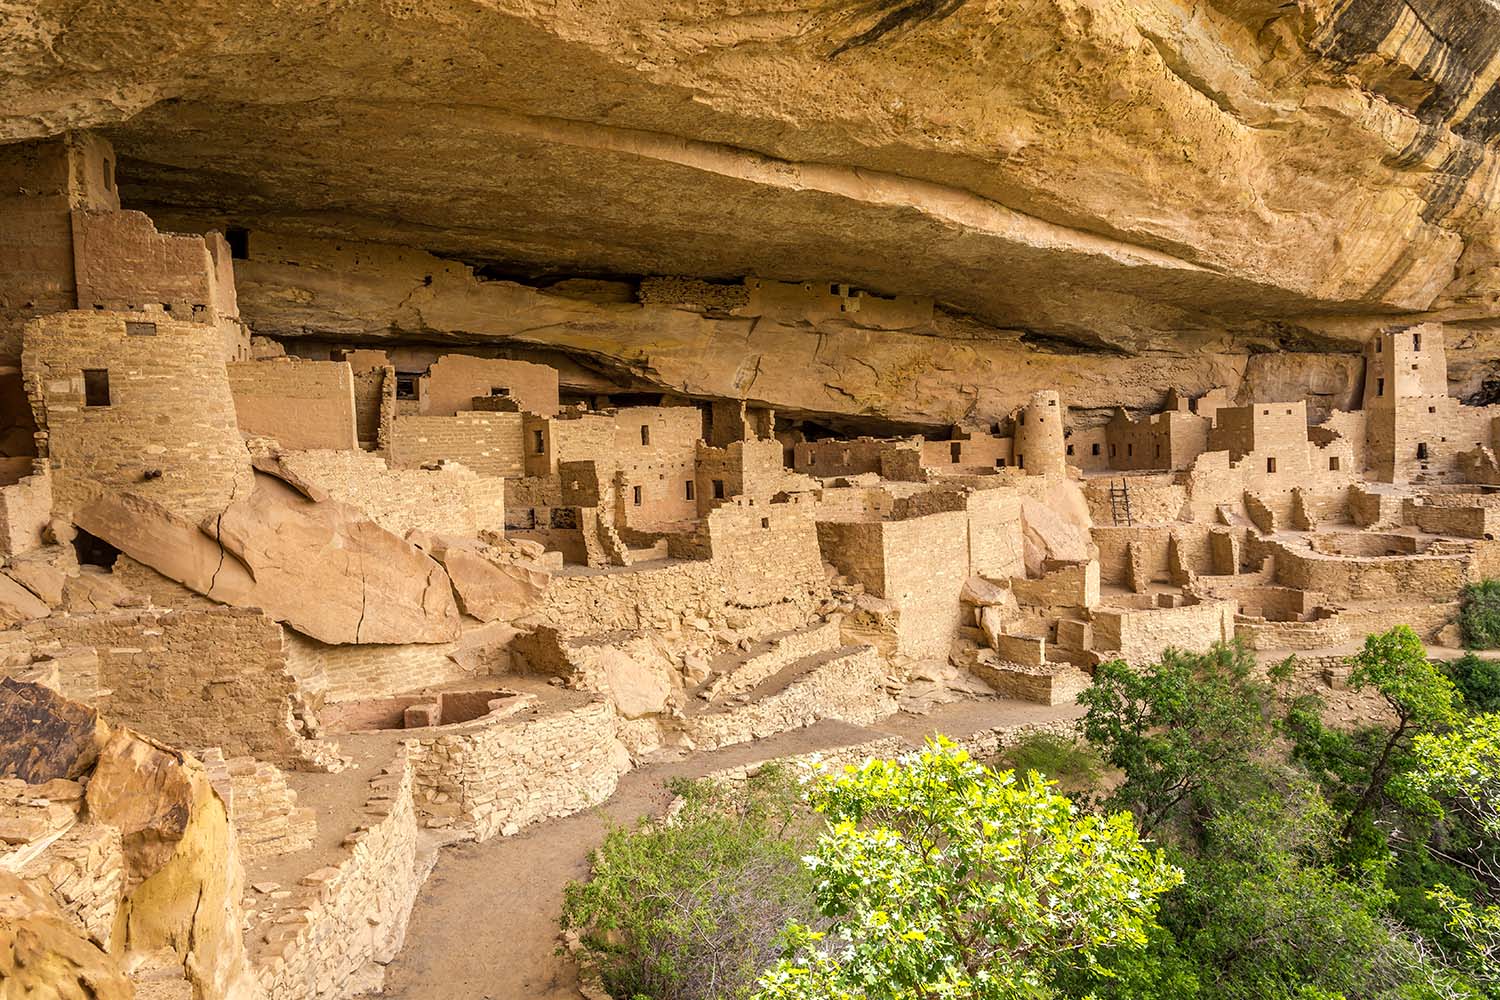 View at the Cliff Palace in Mesa Verde, Colorado, USA